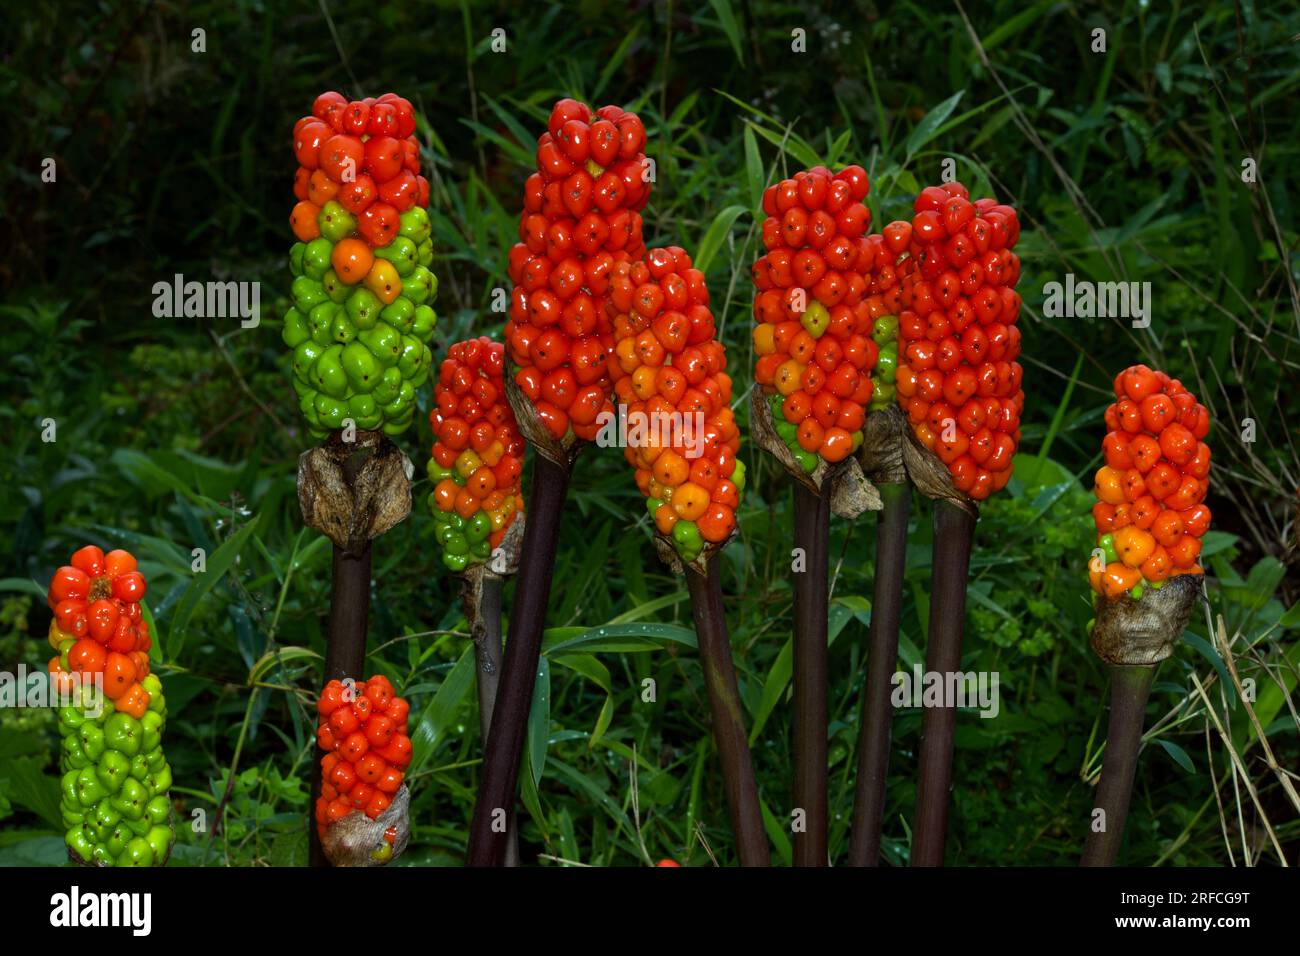 Arum italicum (Italian lords-and-ladies) grows in moist, shady habitats. It is mainly native to Europe but introduced to several countries. Stock Photo